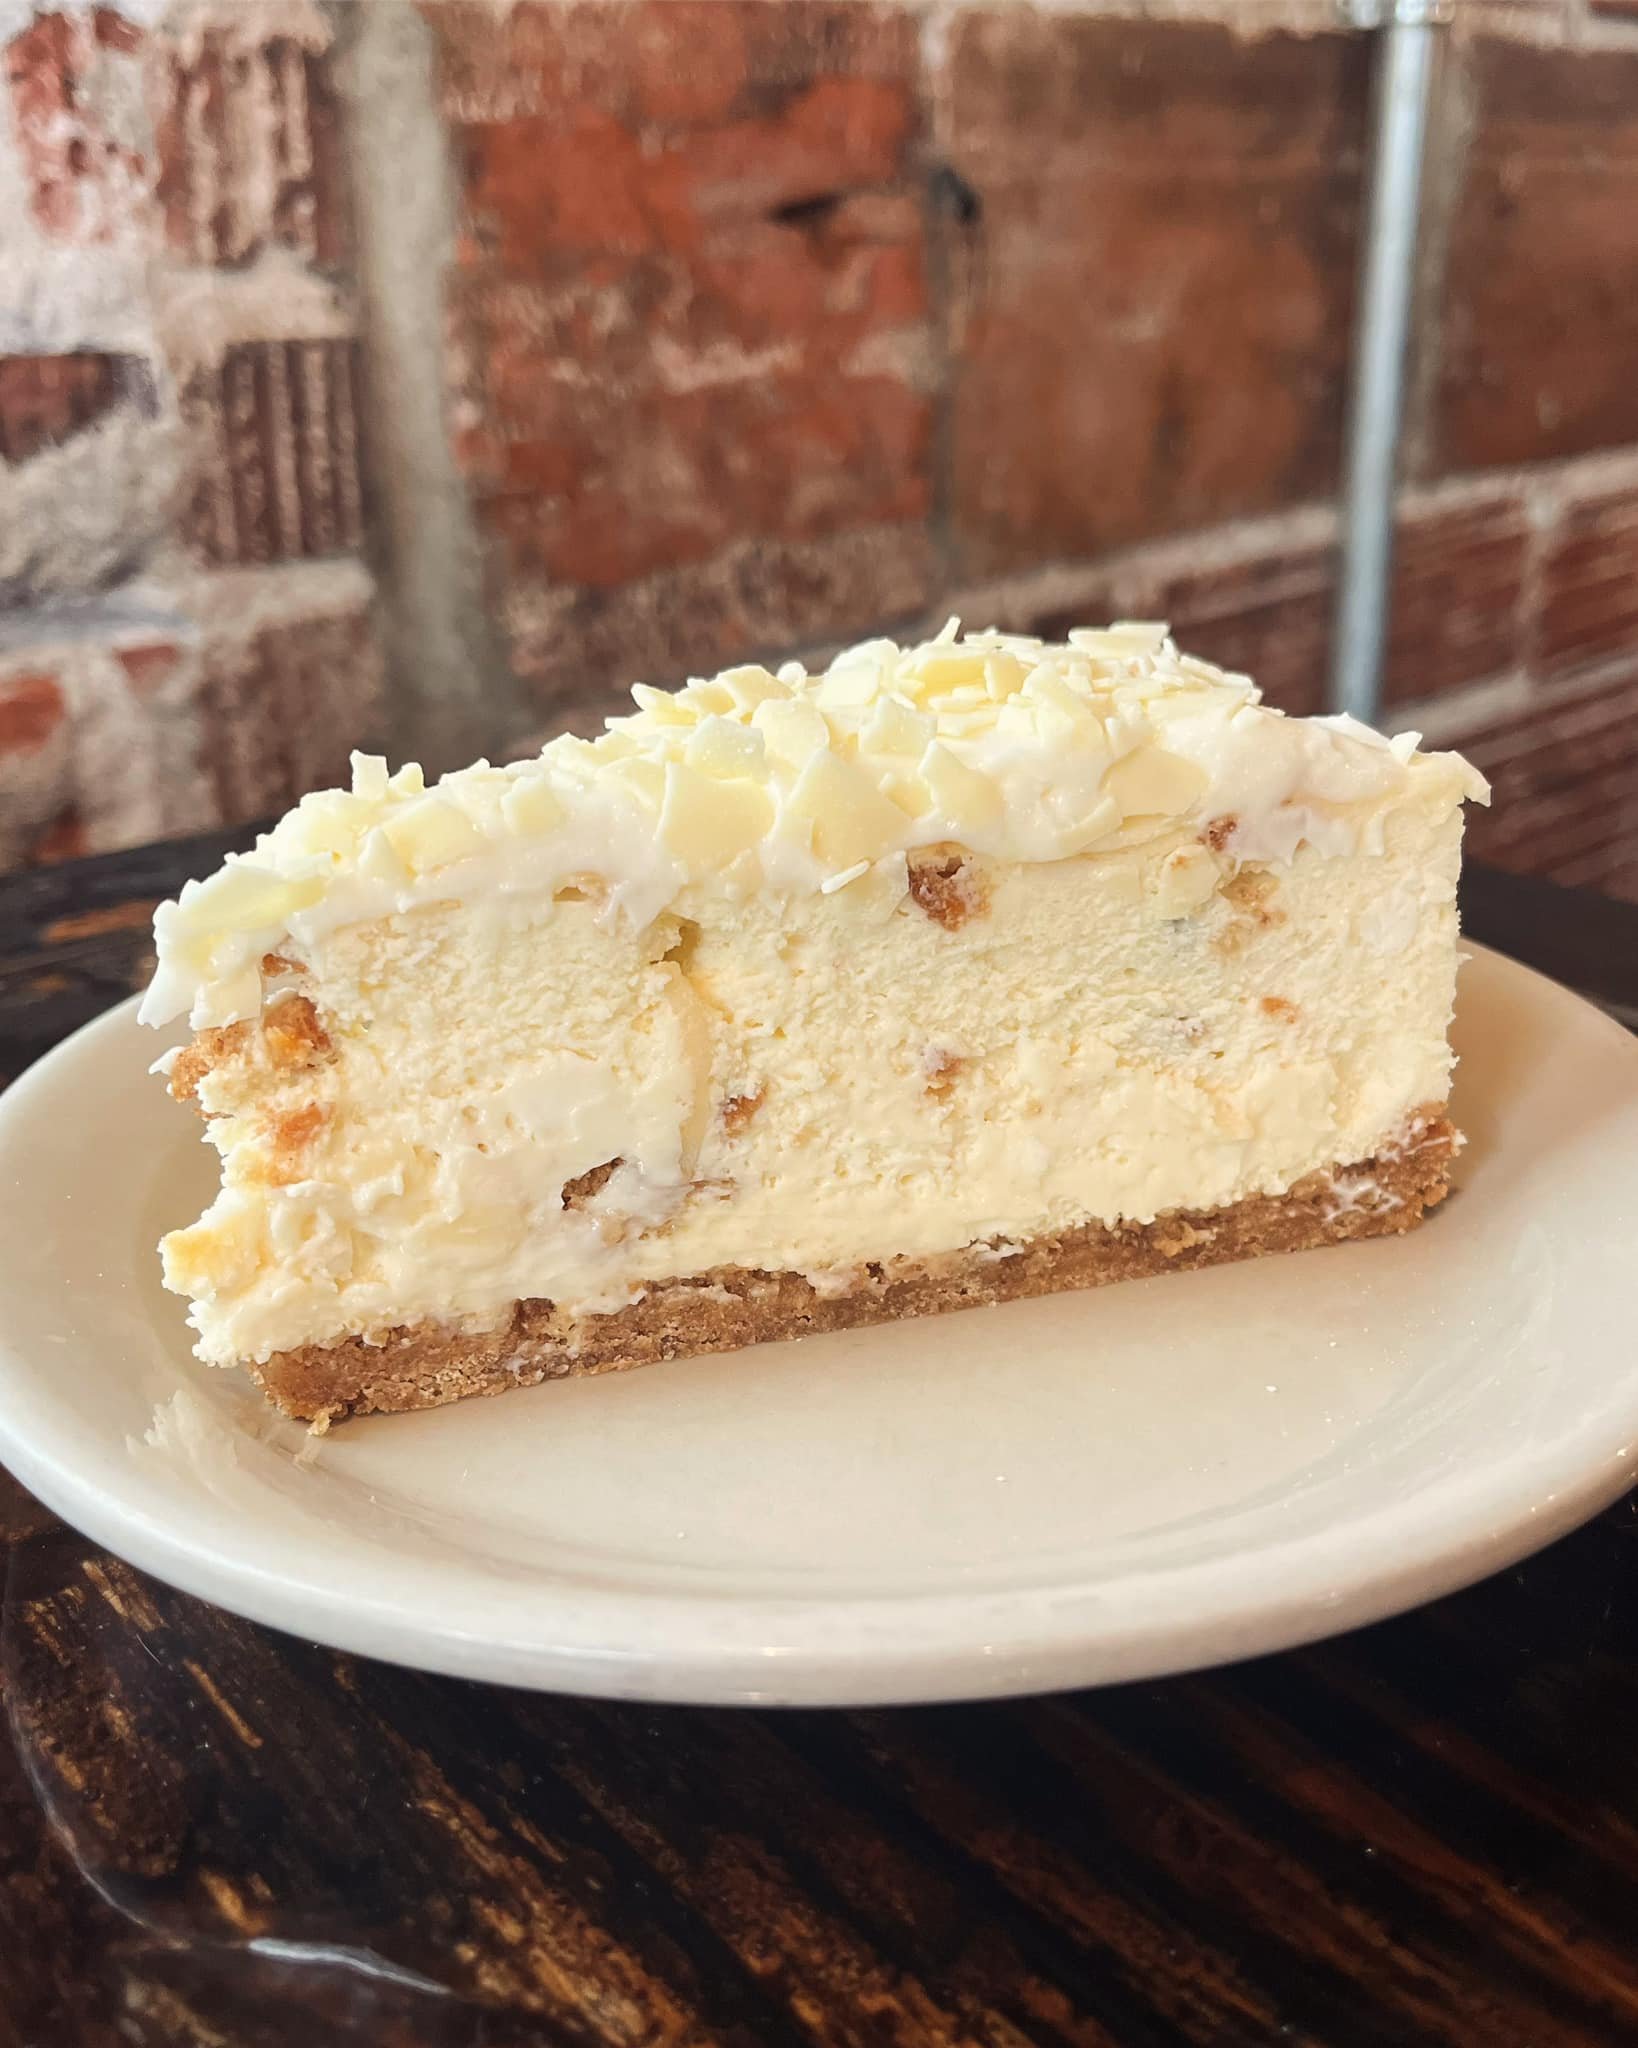 You have been loving our Carrot Cake Cheesecake. We just made one more whole cheesecake, come and get a slice today!